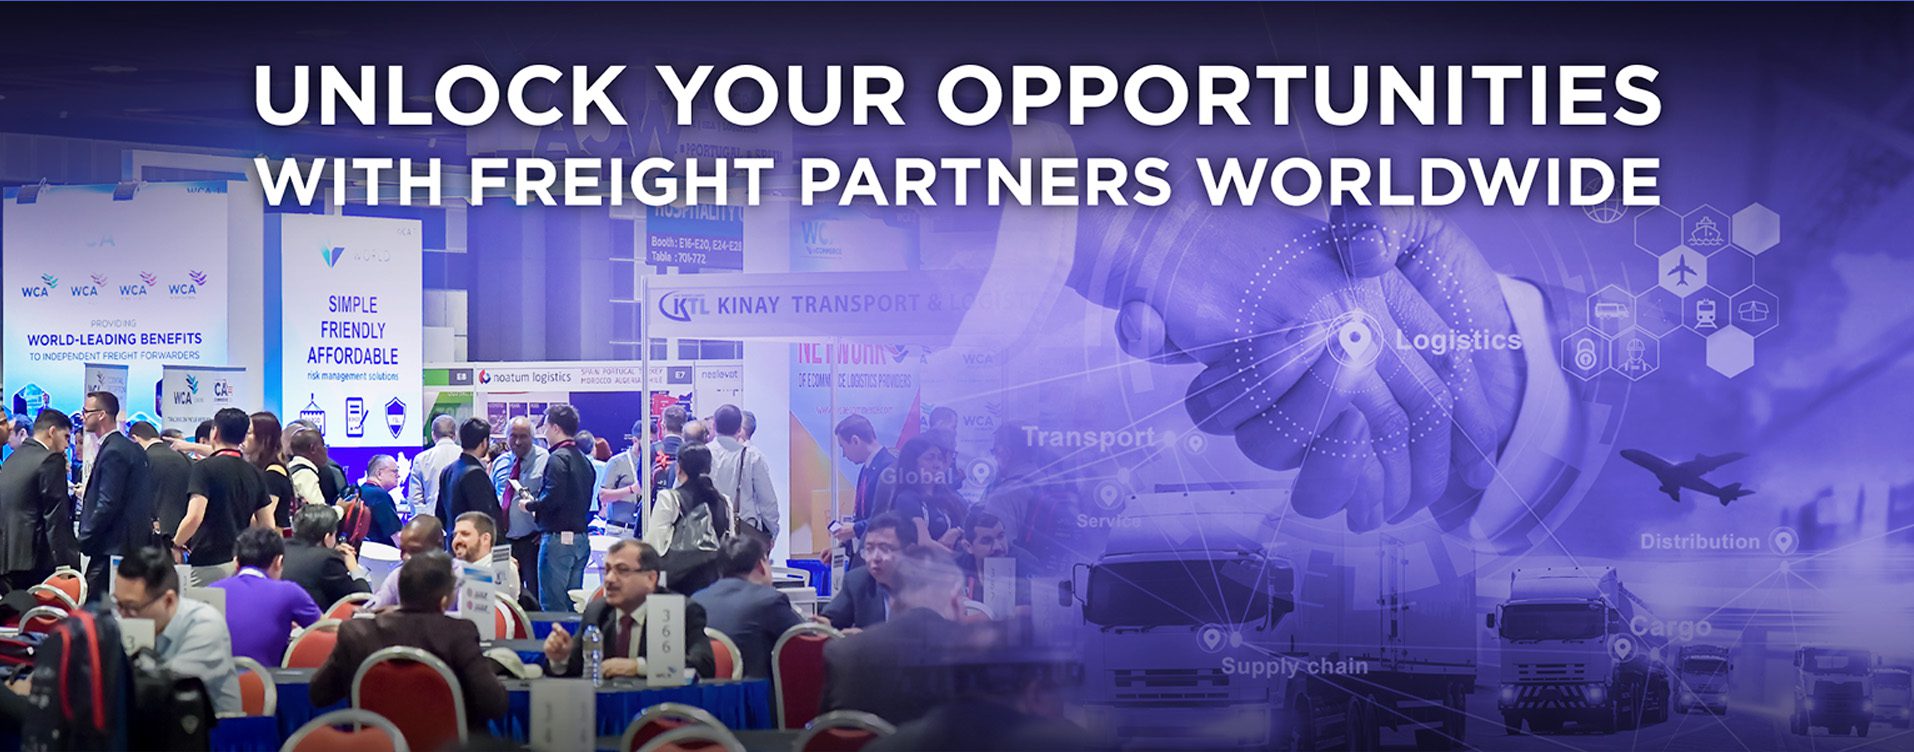 Coppersmith at the World Cargo Alliance Conference